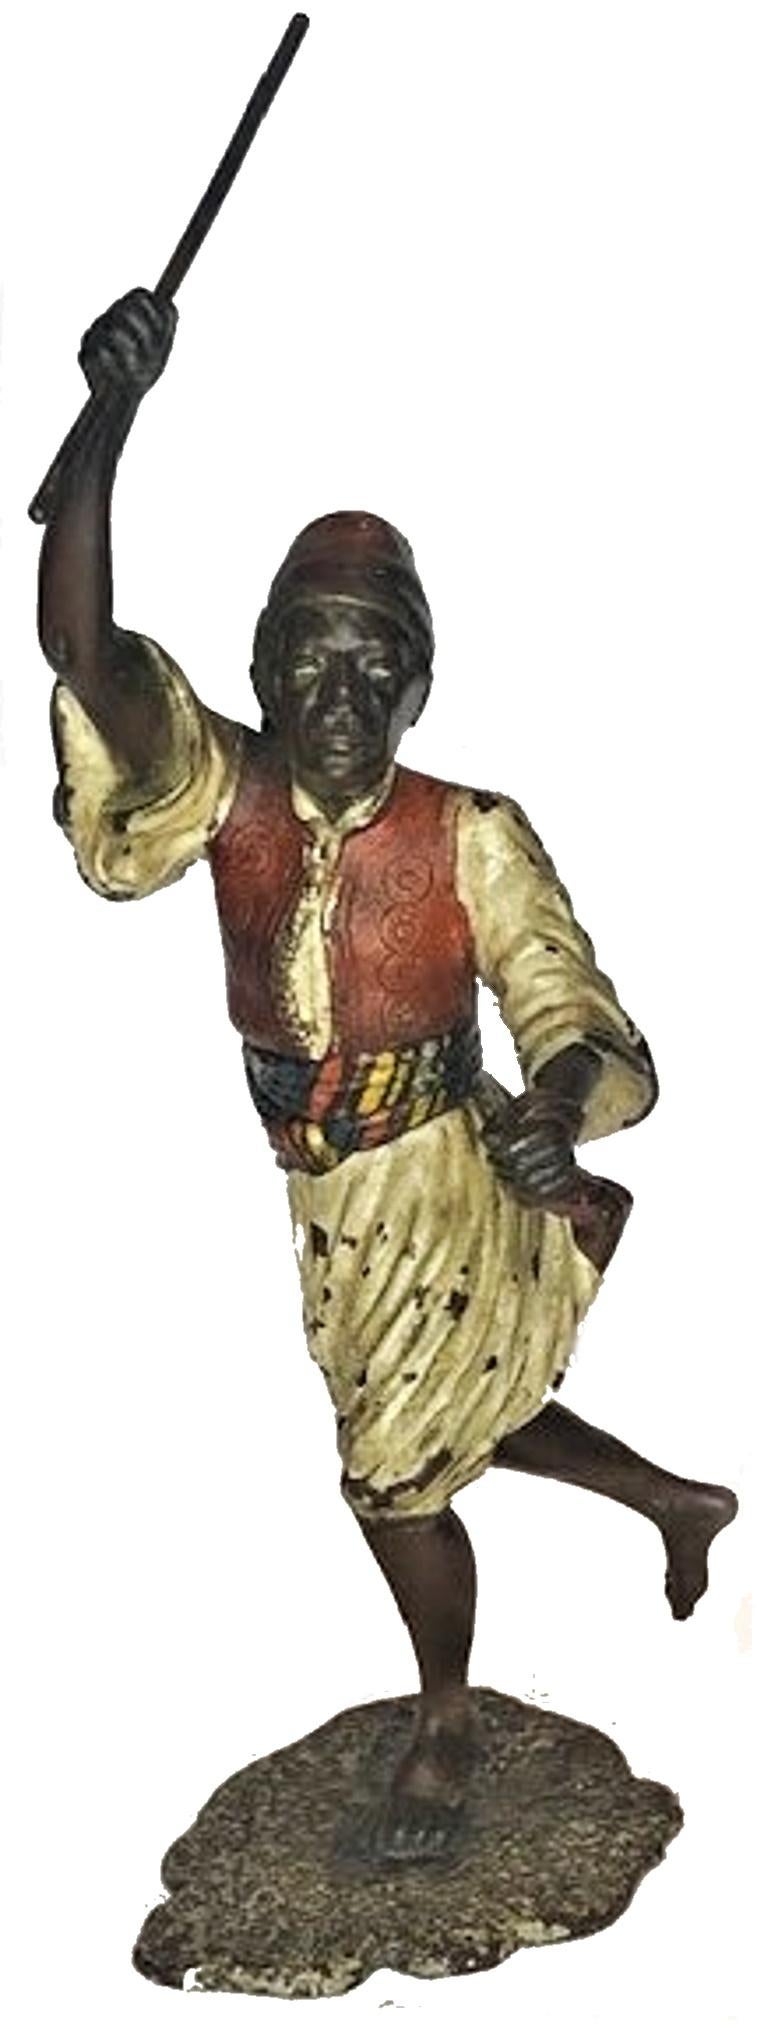 Artist: Franz Xaver Bergmann 

Sculpture: Moorish Warrior

Description: This wonderful life-like sculpture depicts a Moorish warrior in a historical costume, at the moment of throwing a javelin. It is created in polychrome cold-painted bronze,